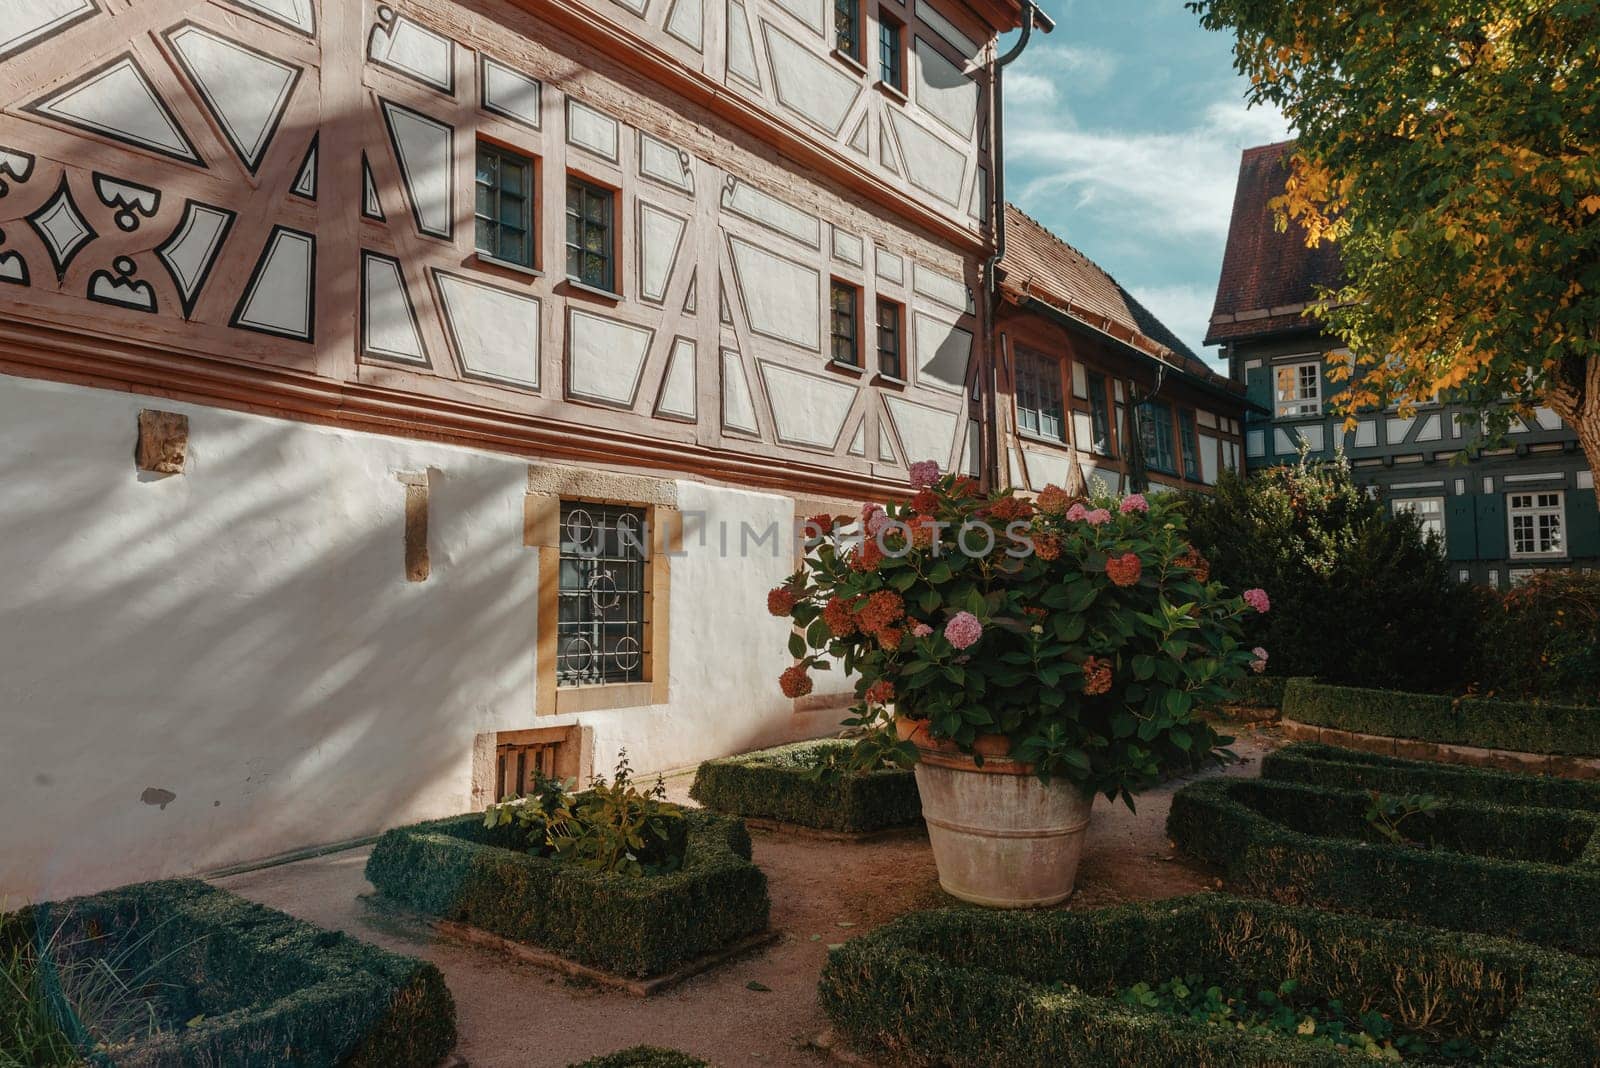 Beautiful Garden and Old National German Half-Timbered houses Town House in Bietigheim-Bissingen, Baden-Wuerttemberg, Germany, Europe. Old Town is full of colorful and well preserved buildings. by Andrii_Ko